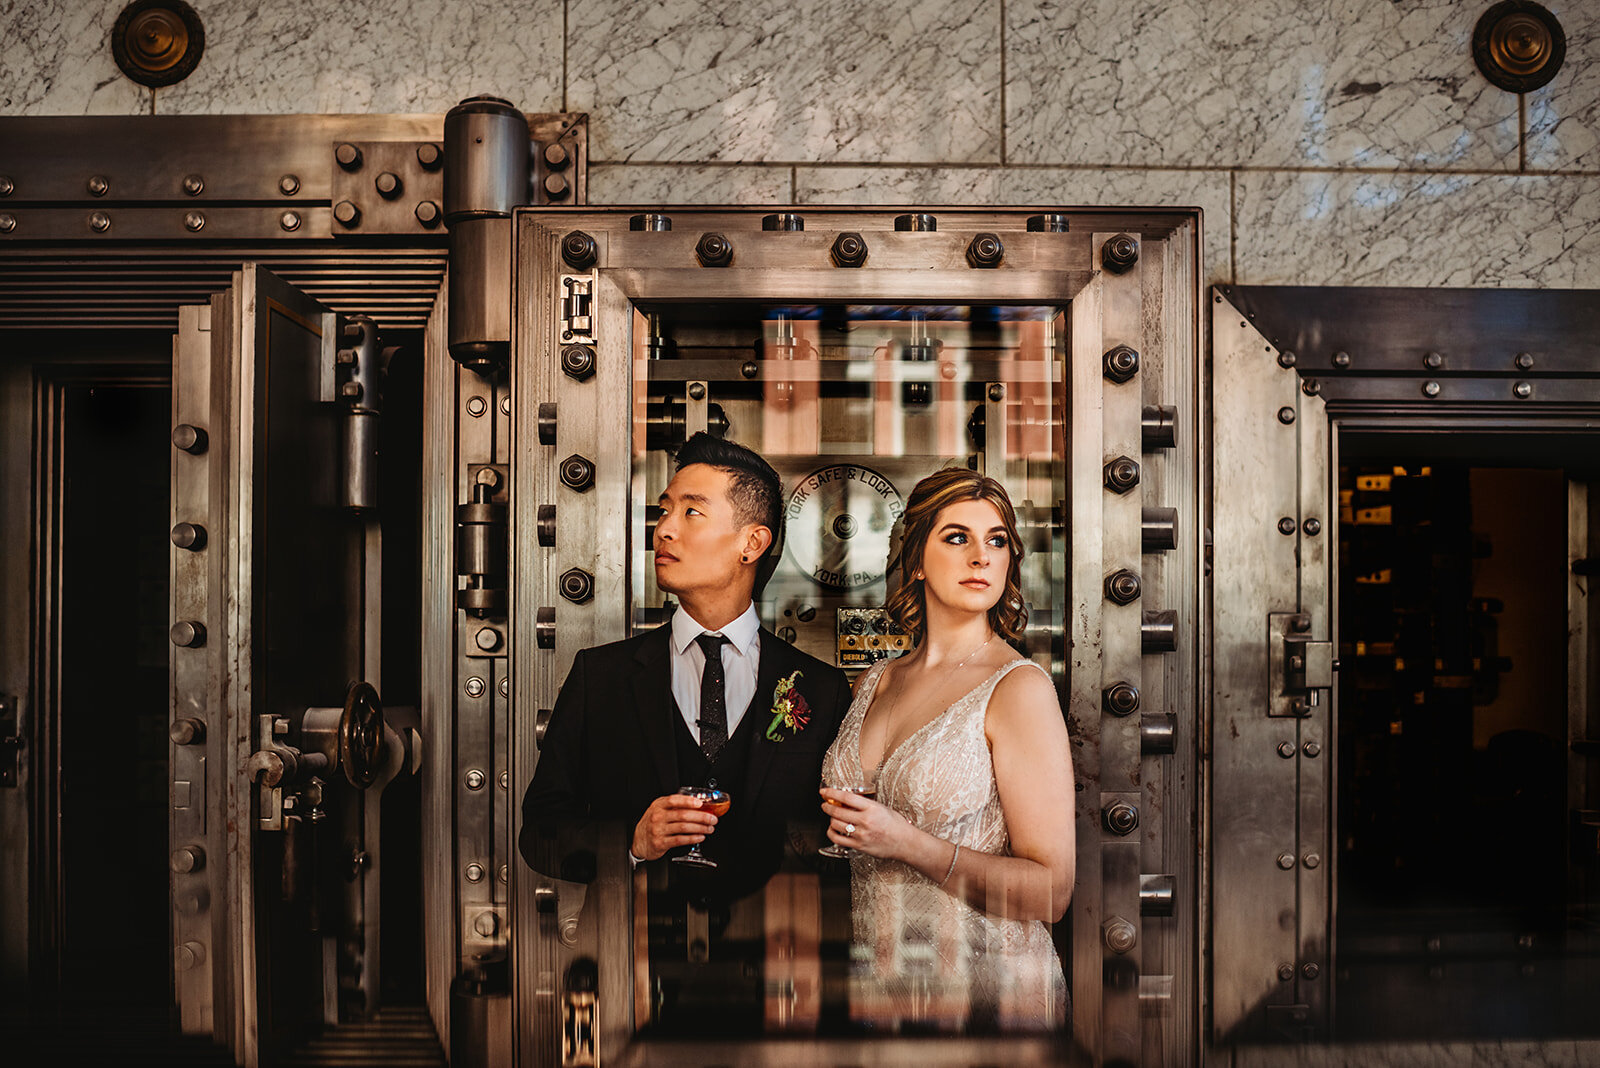 Baltimore photographers captures wedding at a bank with bride and groom holding cocktails while standing in front of a vault